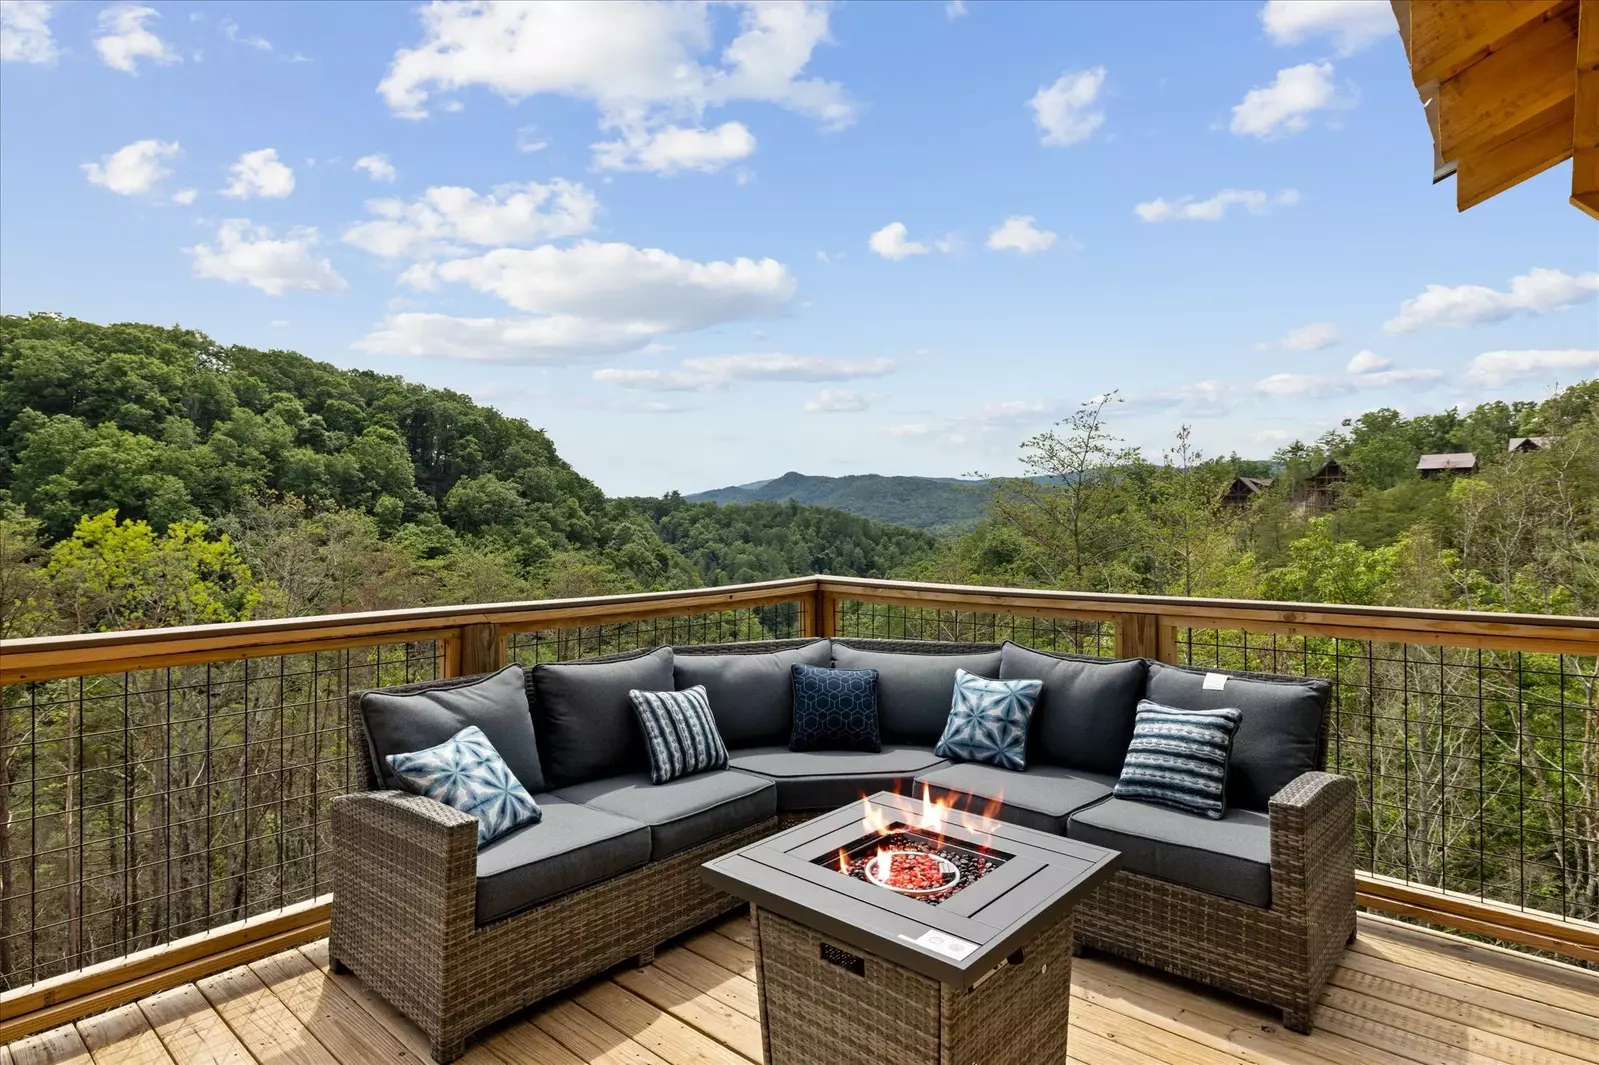 fire pit and sofa on deck of cabin with a mountain view